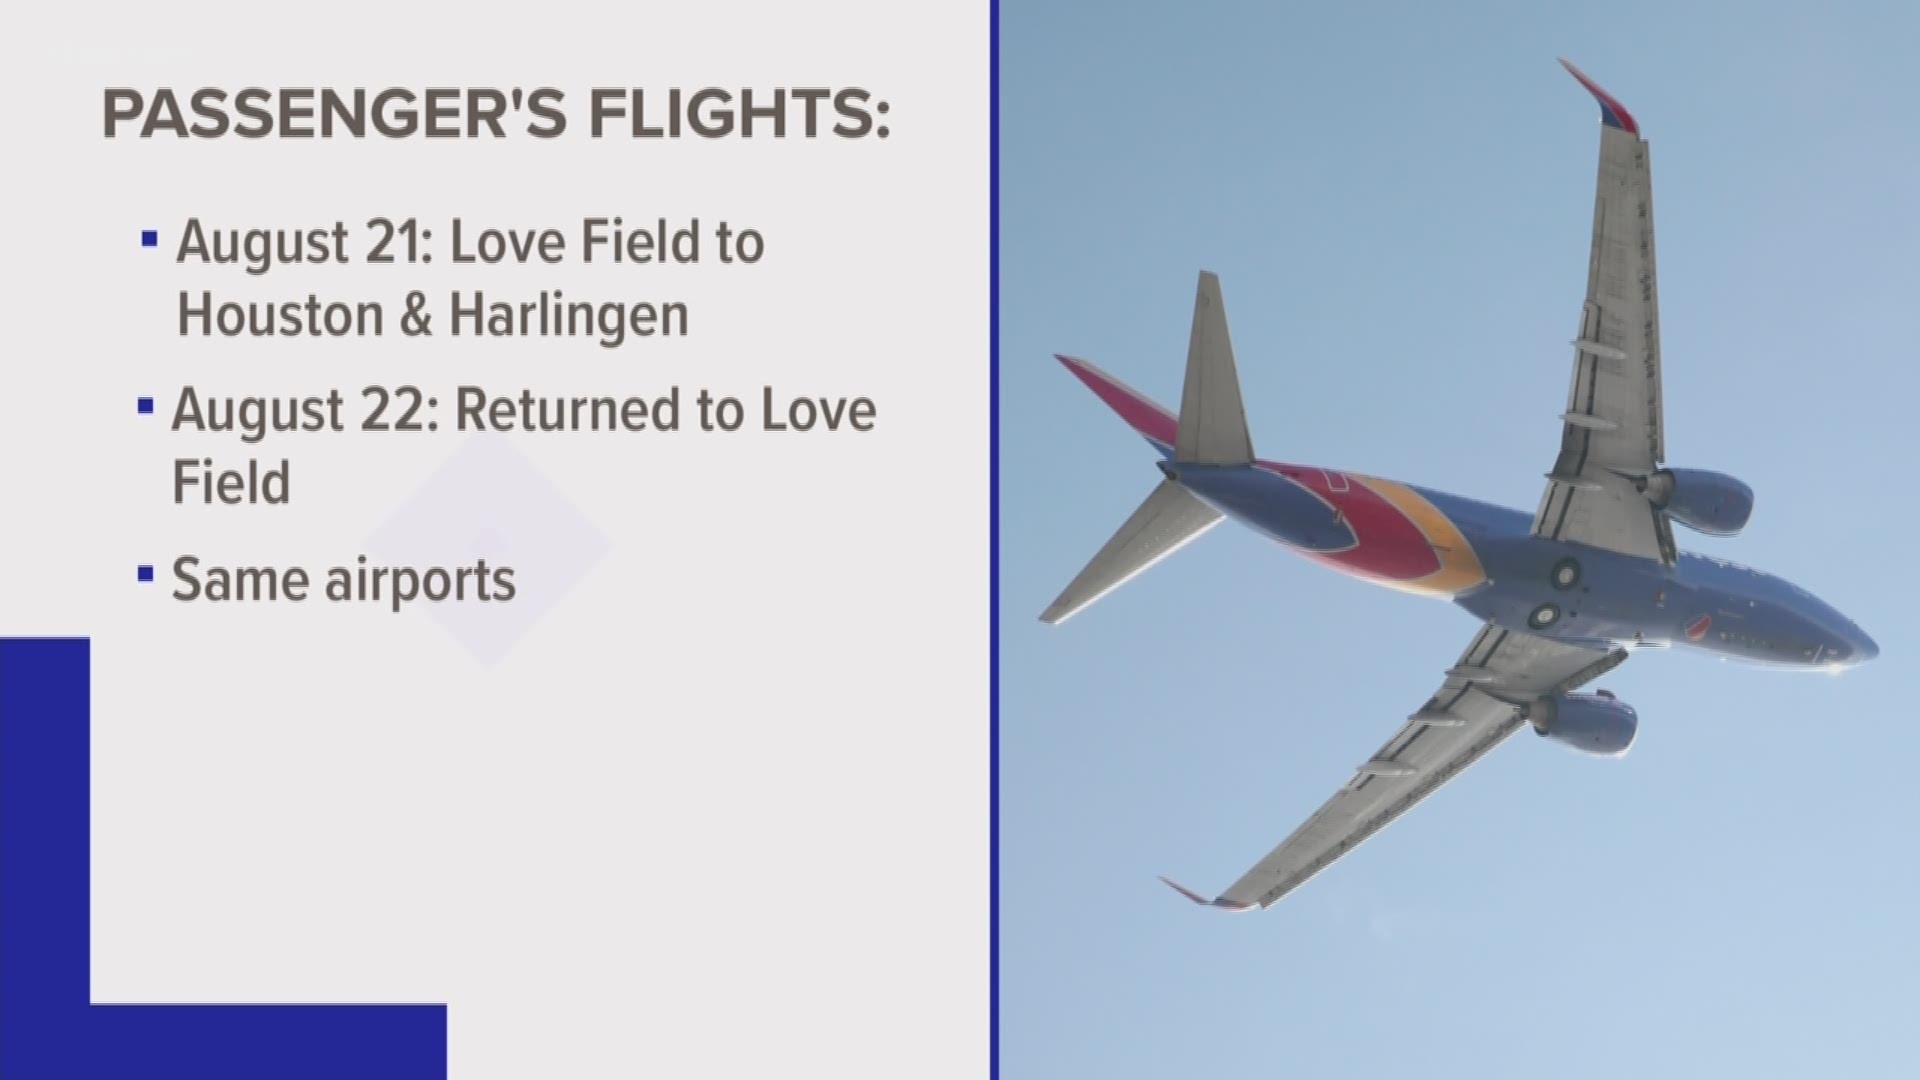 SWA passengers may have been exposed to measles